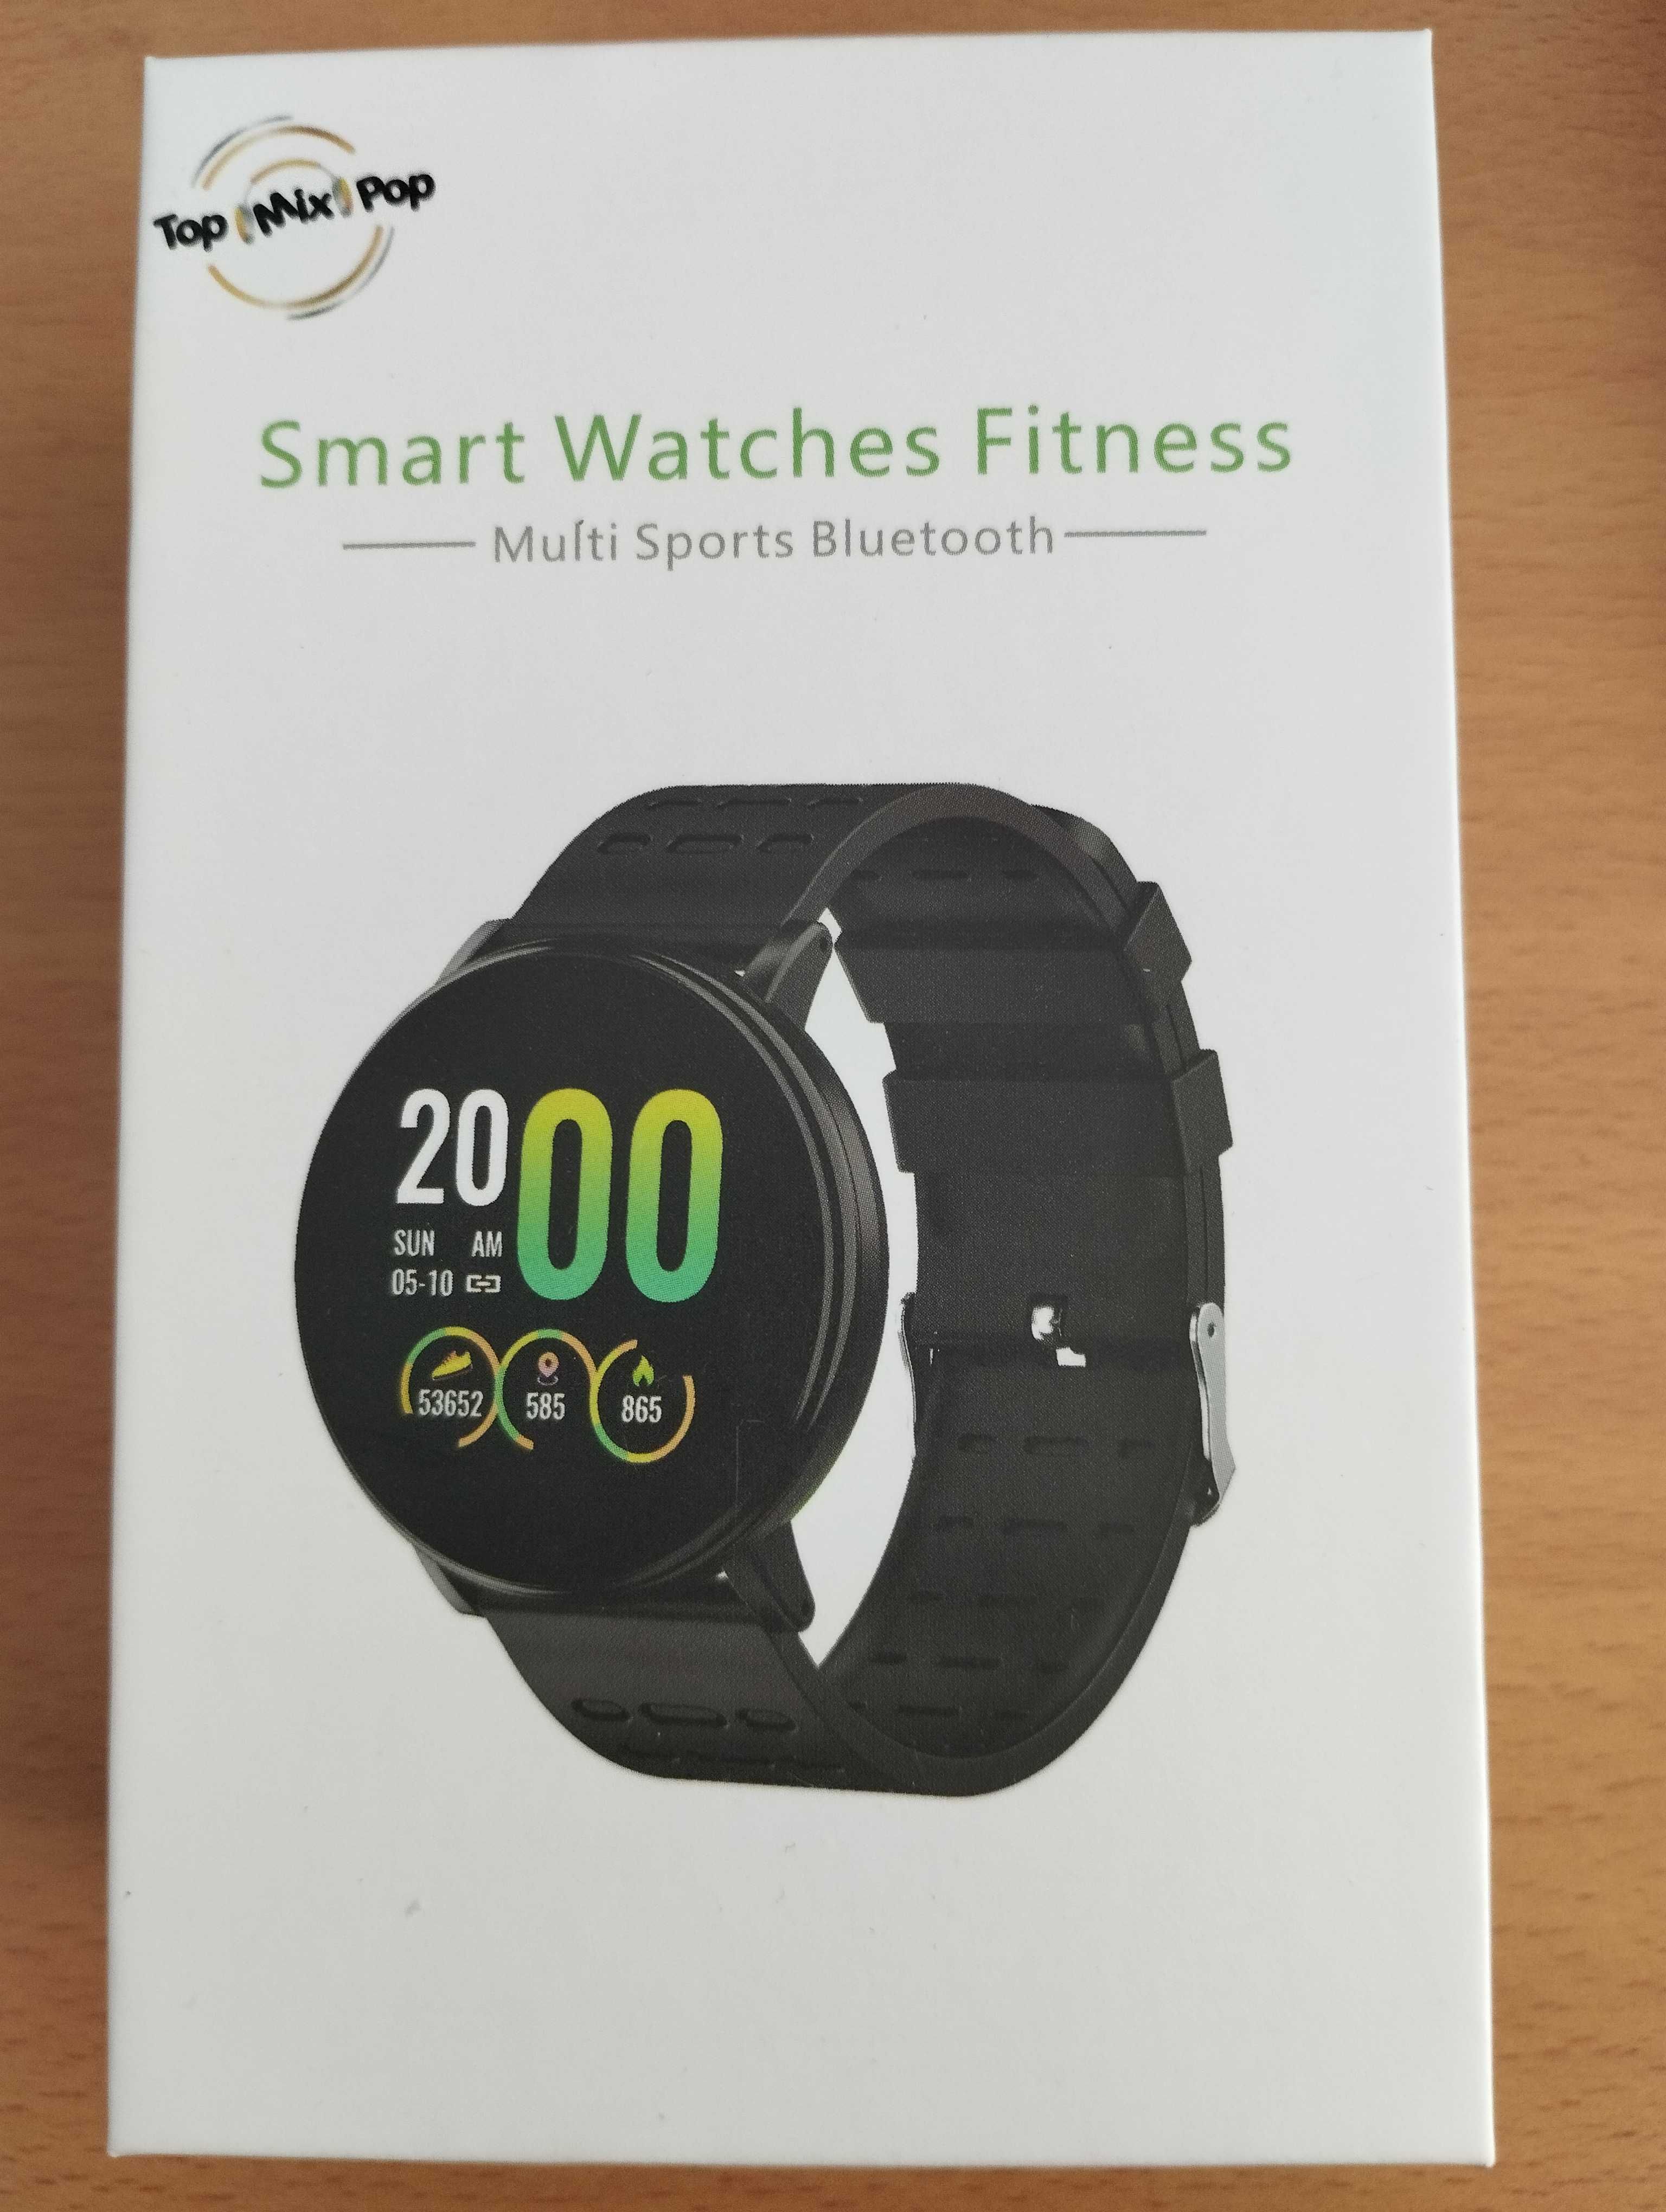 Smart watches fitness